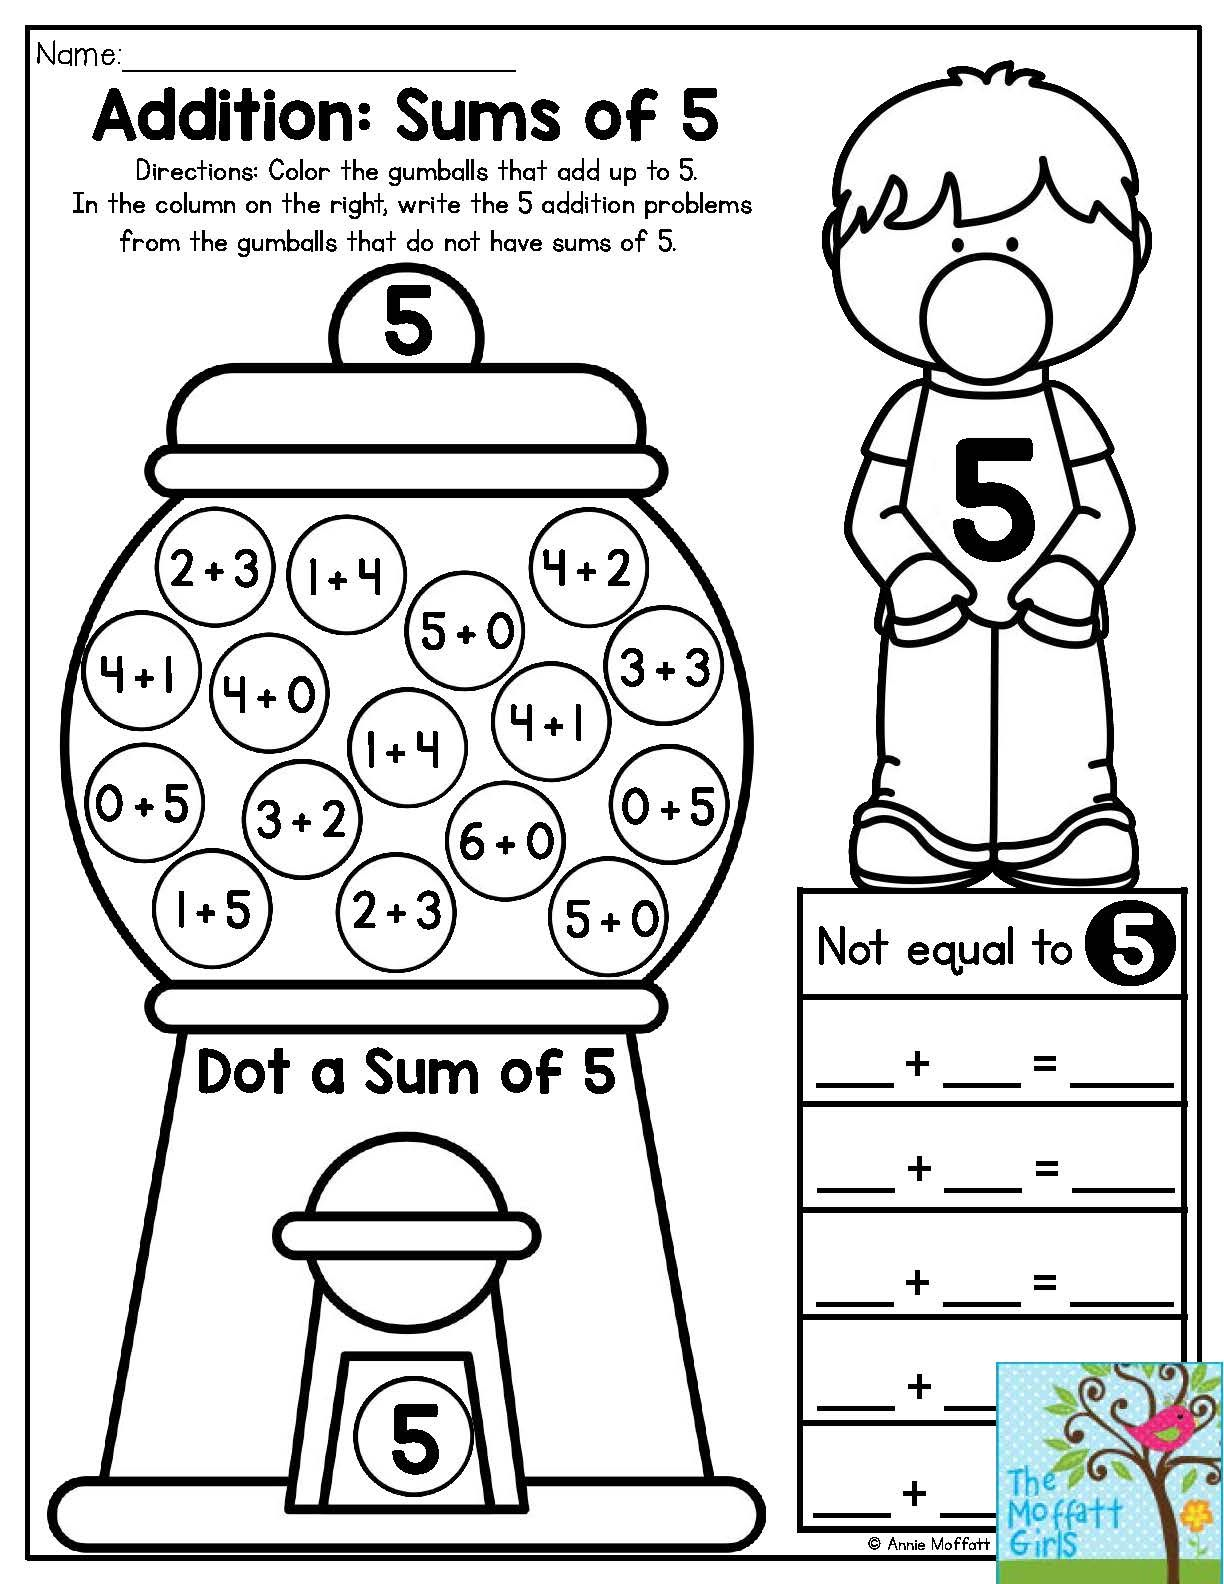 Bubble Gum Numbers Addition Sums Of 5 Color The Gumballs That Add Up 